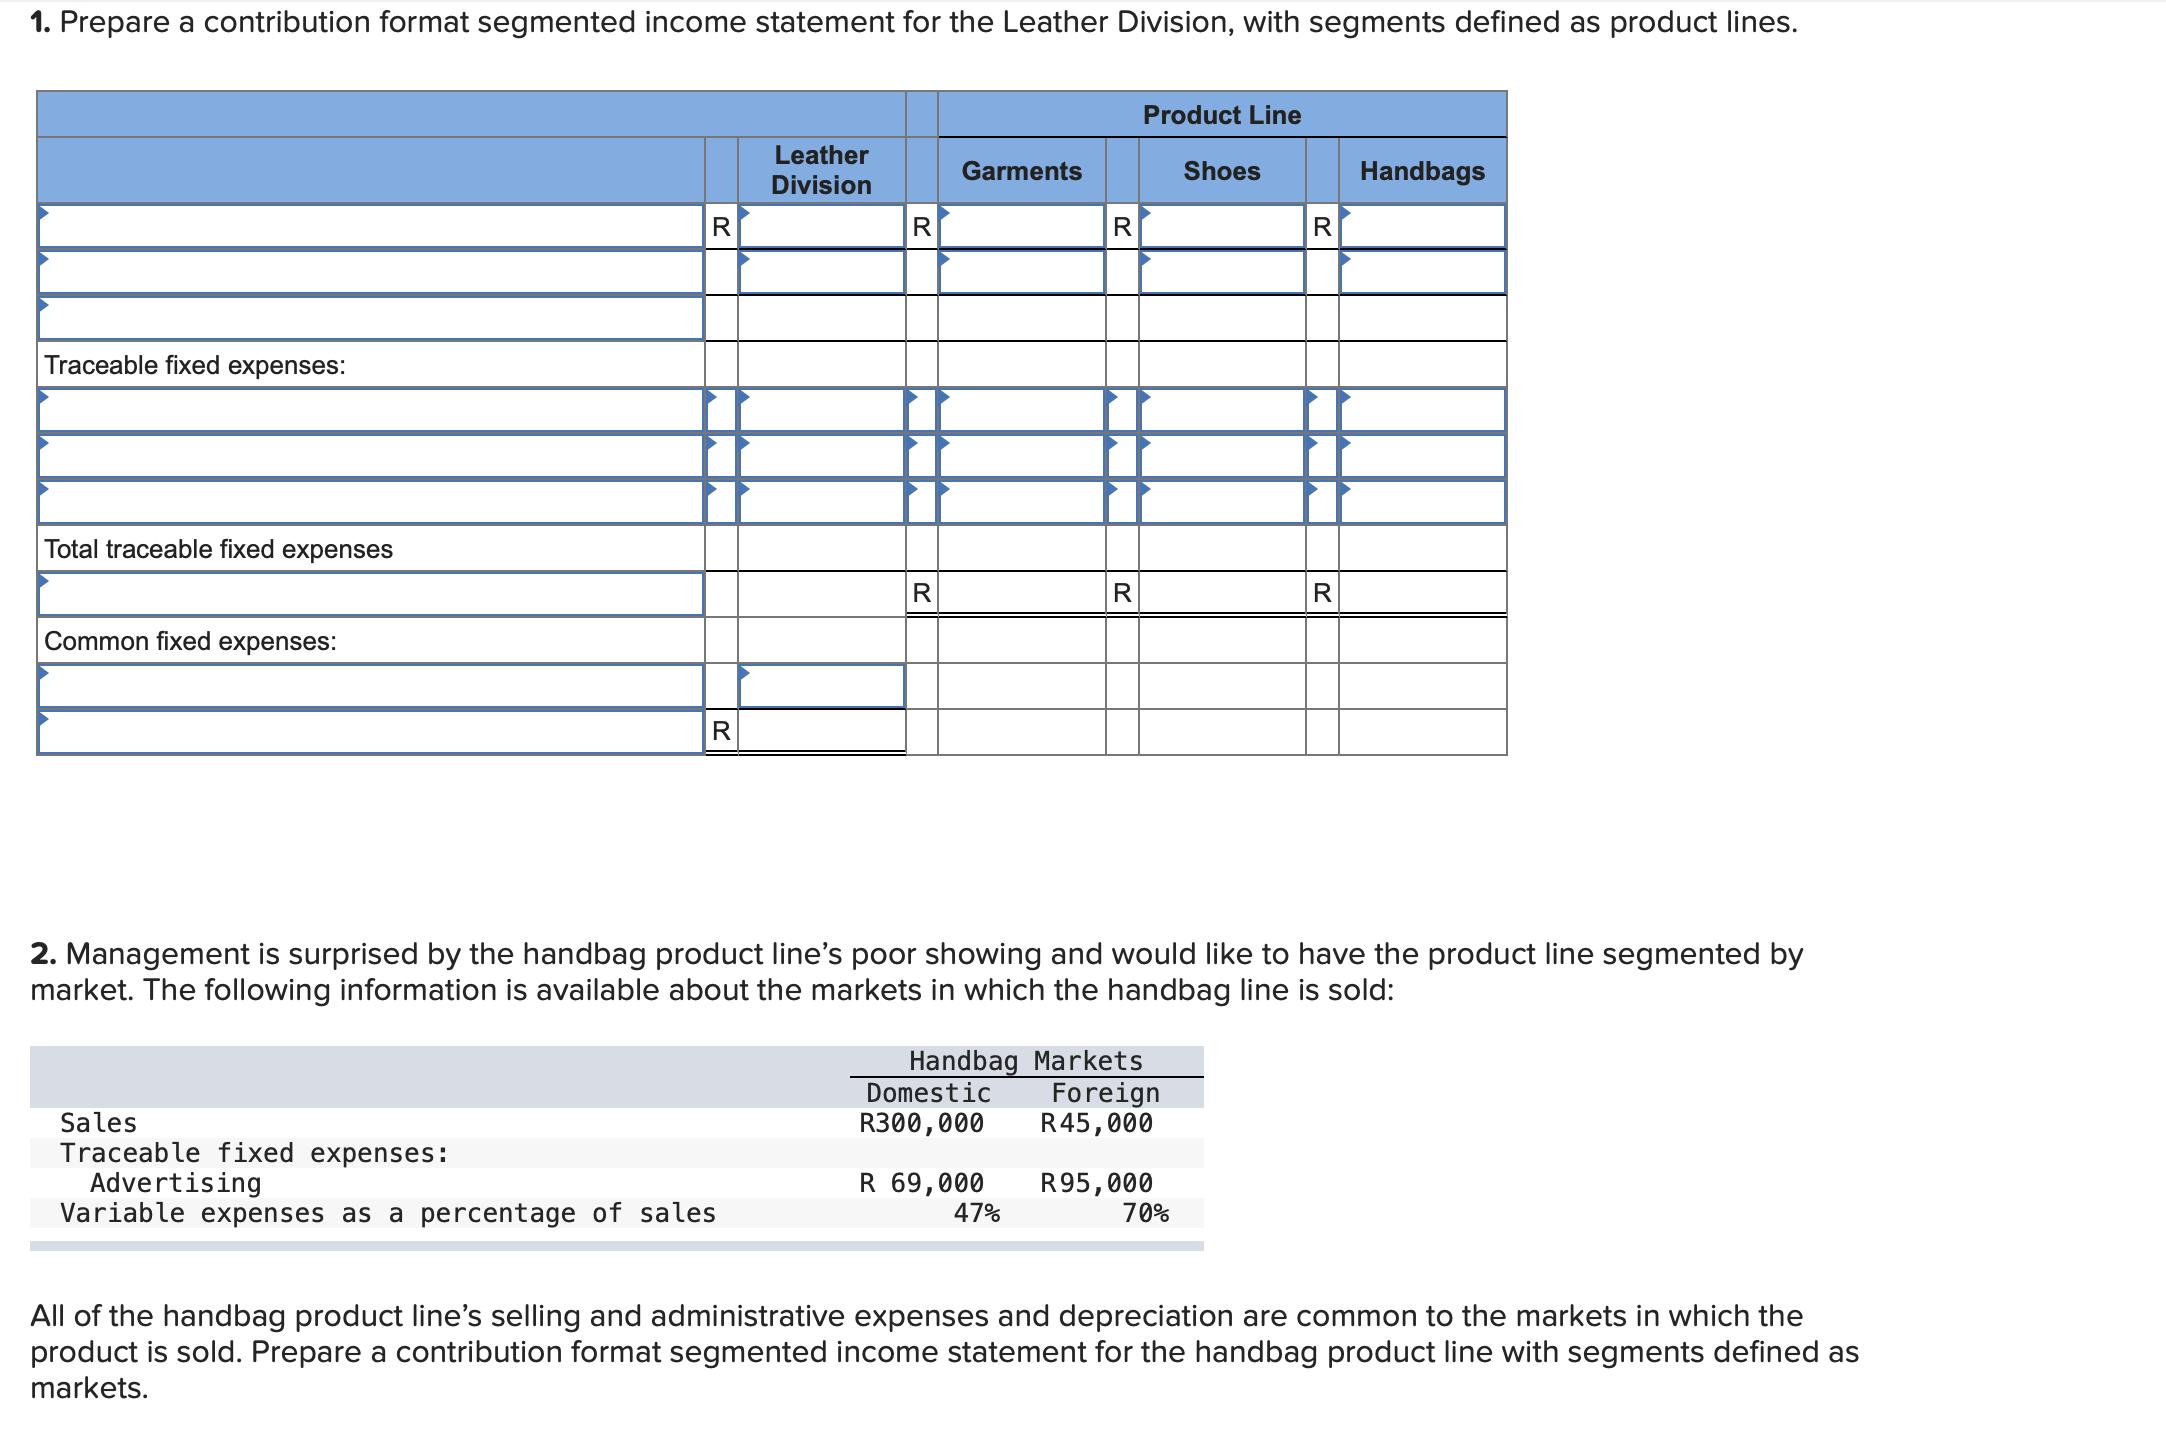 1. Prepare a contribution format segmented income statement for the Leather Division, with segments defined